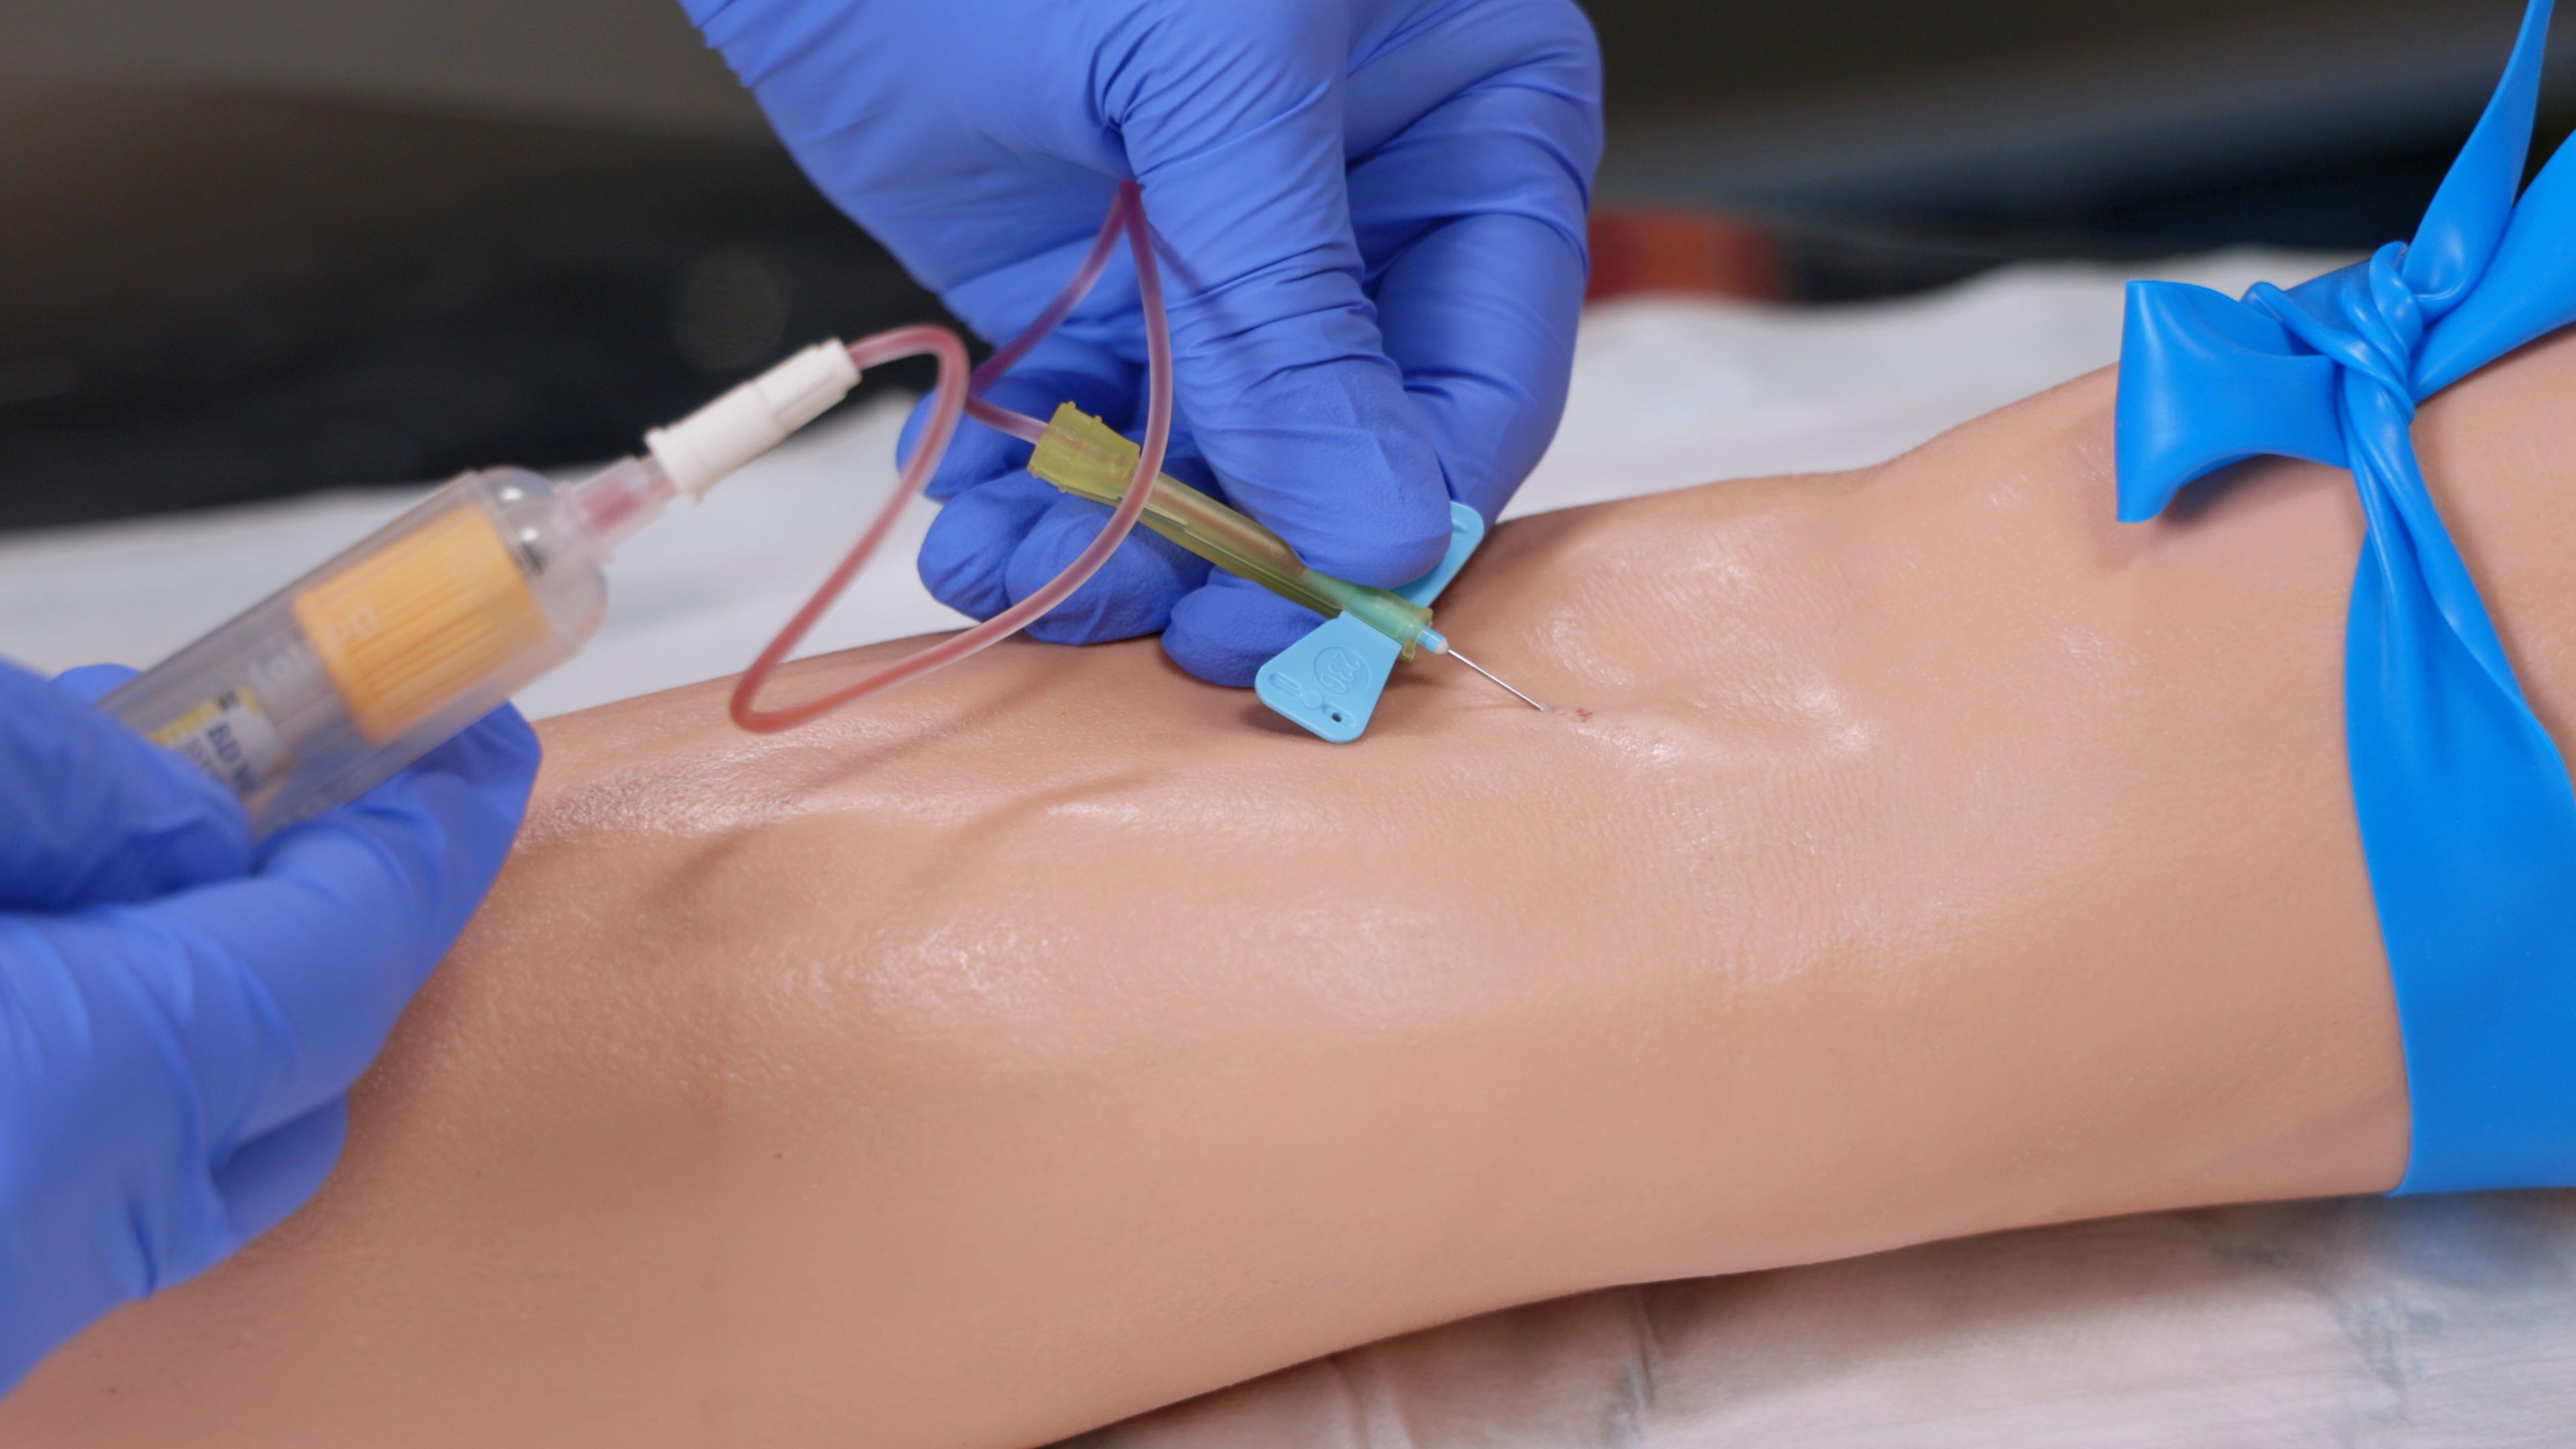 A part task training device is used to practice the skills of Phlebotomy